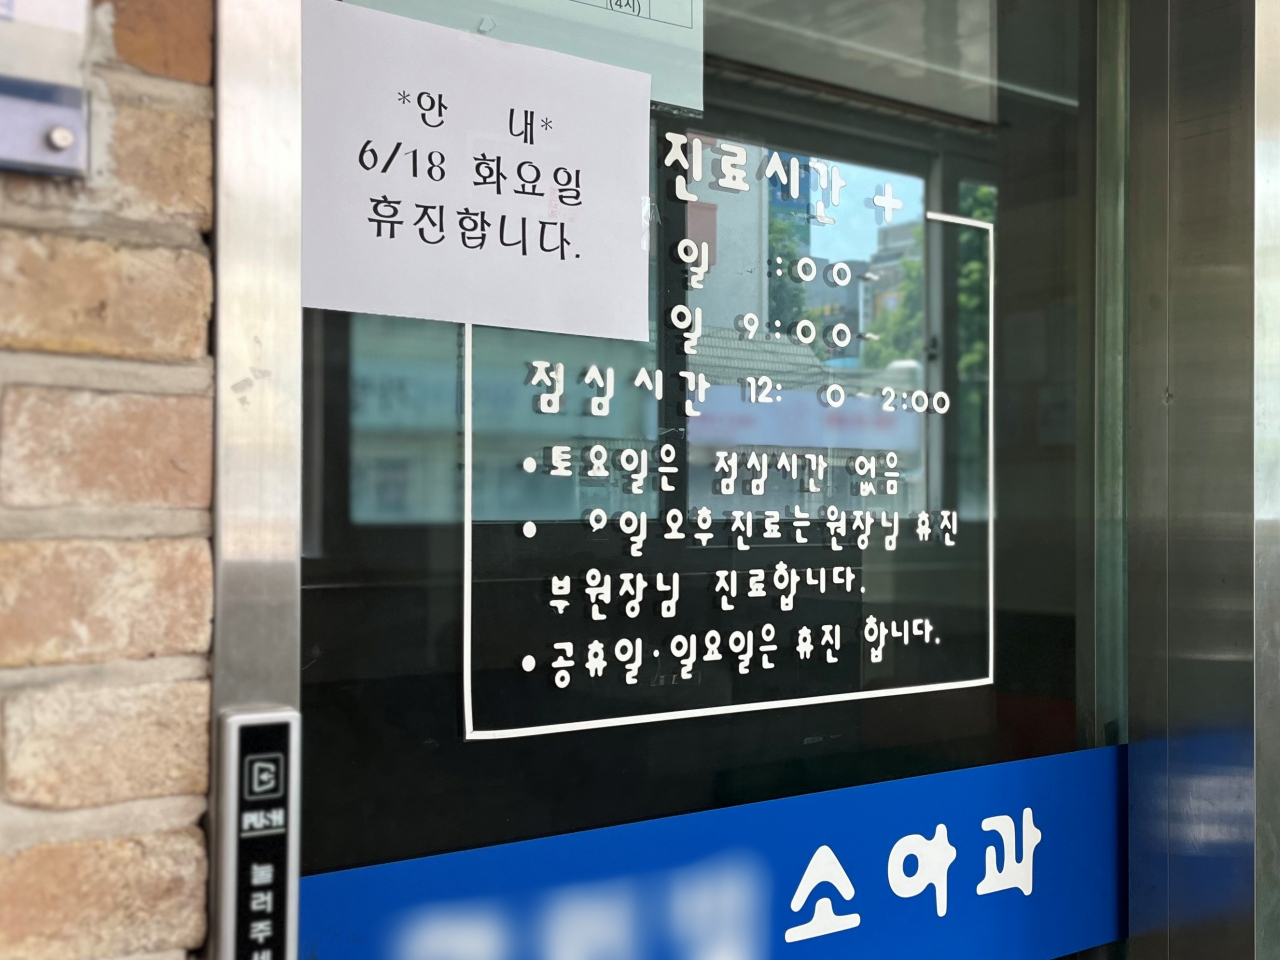 A notice at a pediatric clinic in Nowon, Seoul, on Tuesday, says that the clinic will be closed for the entire day. (Lee Jaeeun/The Korea Herald)